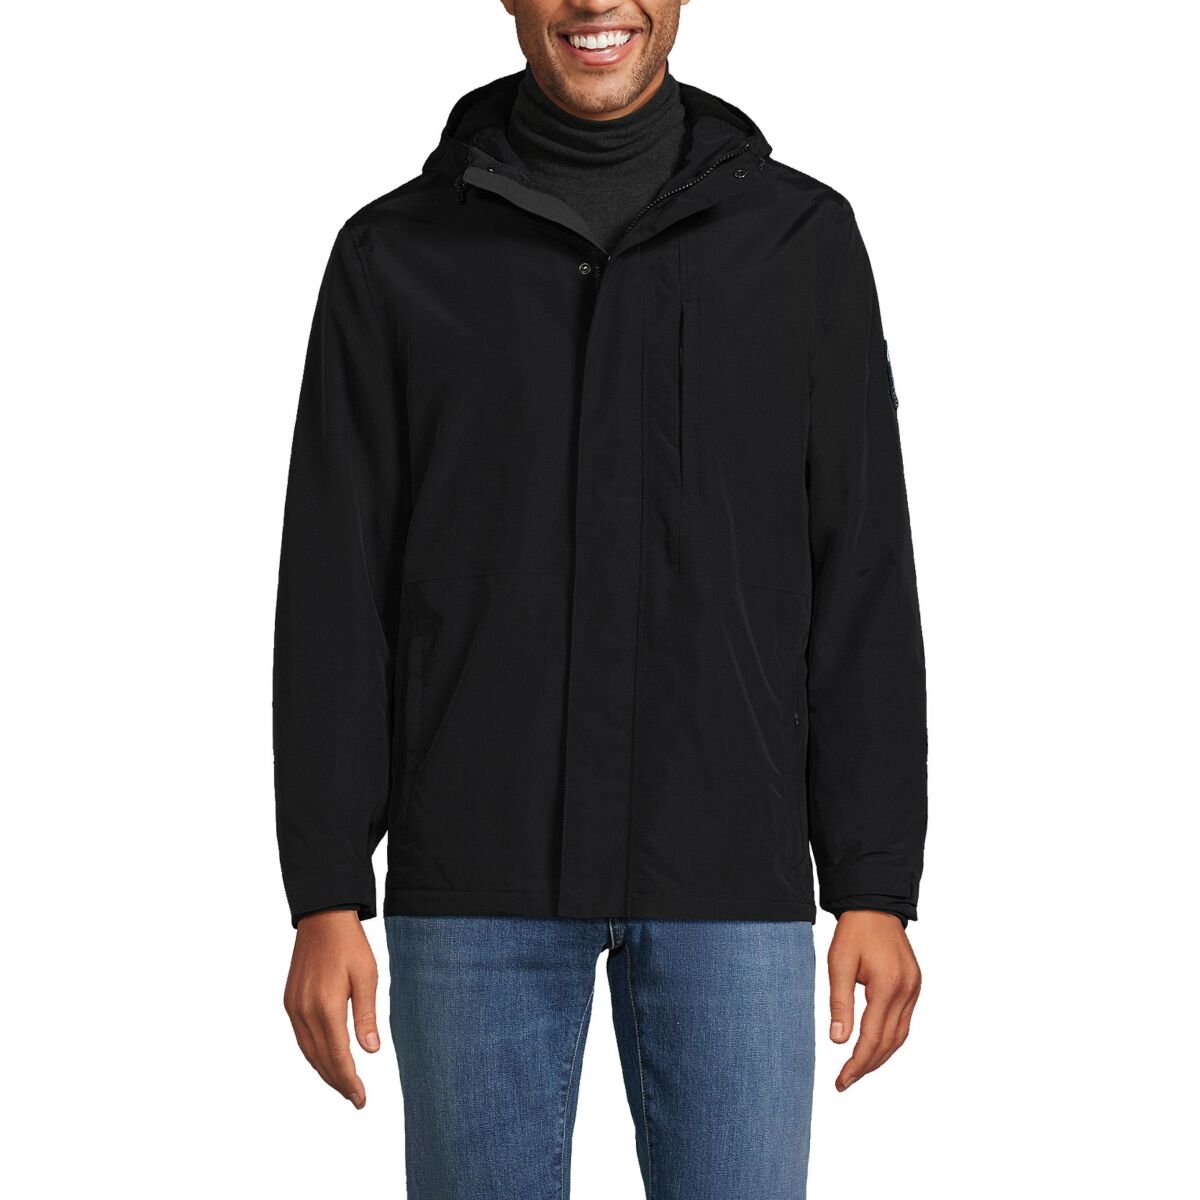 Lands' End Men's Squall Waterproof Insulated Winter Jacket - Black